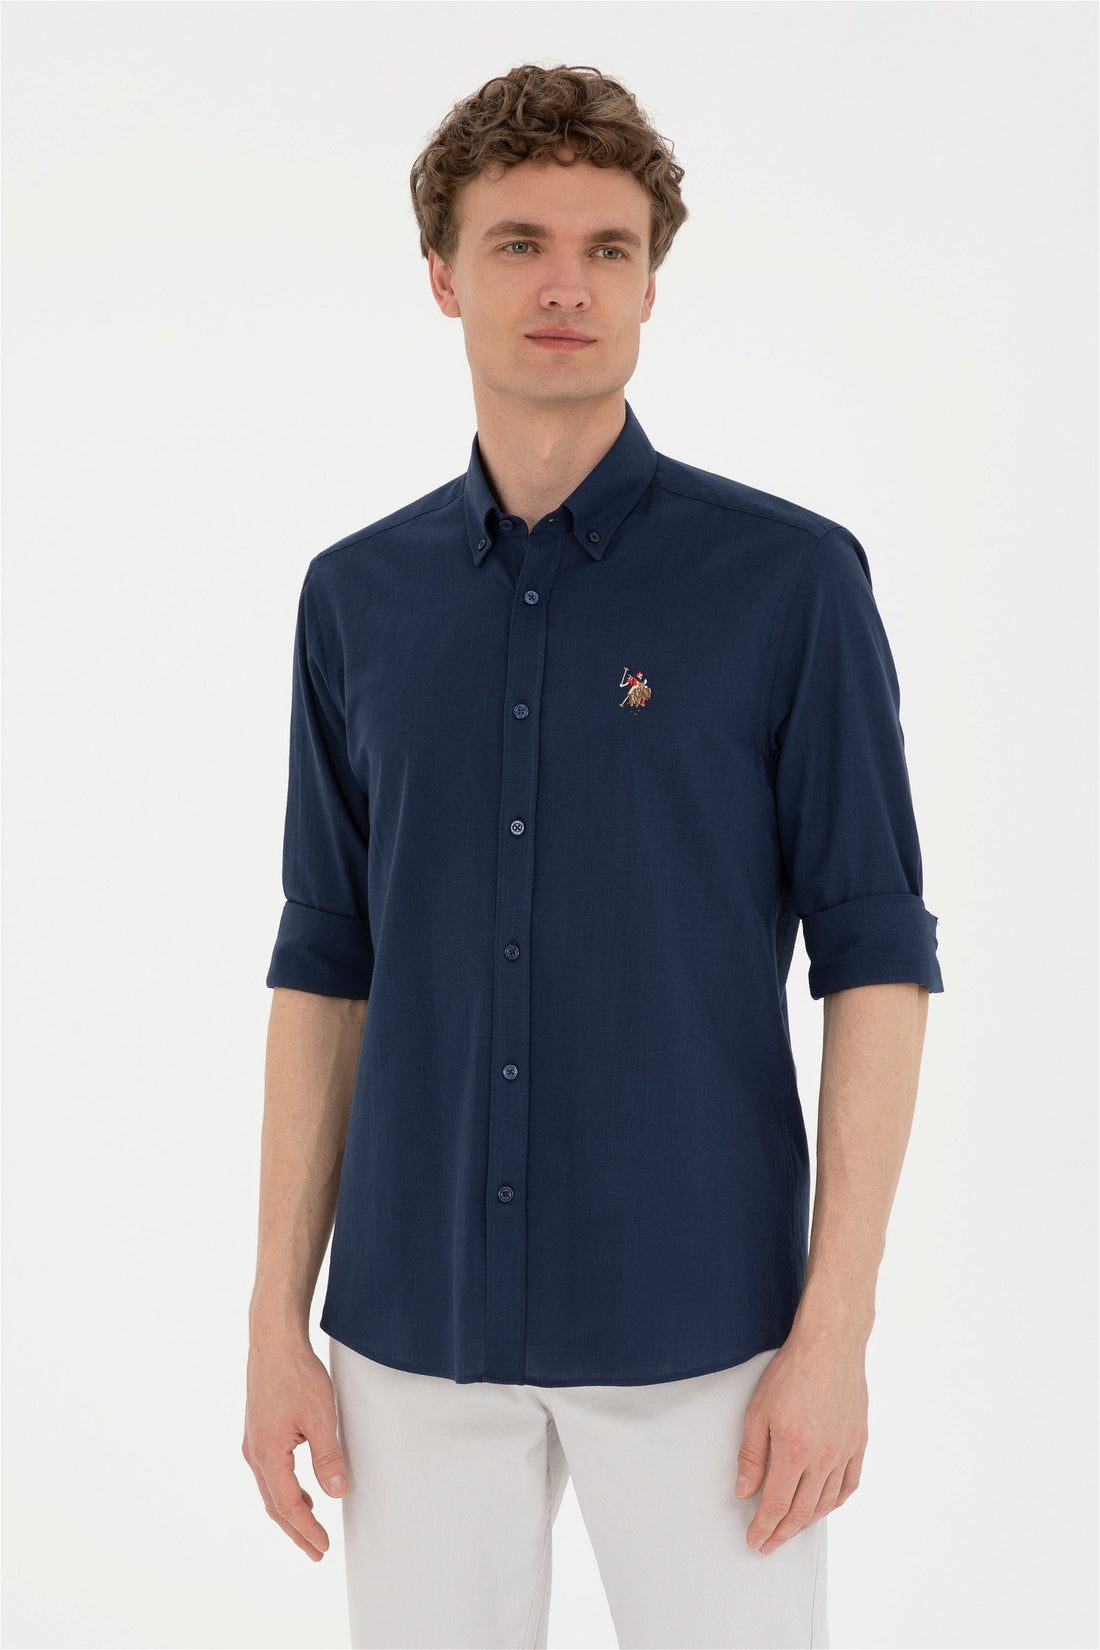 Button Down Shirt With Logo_G081GL0040 1829583_VR033_01